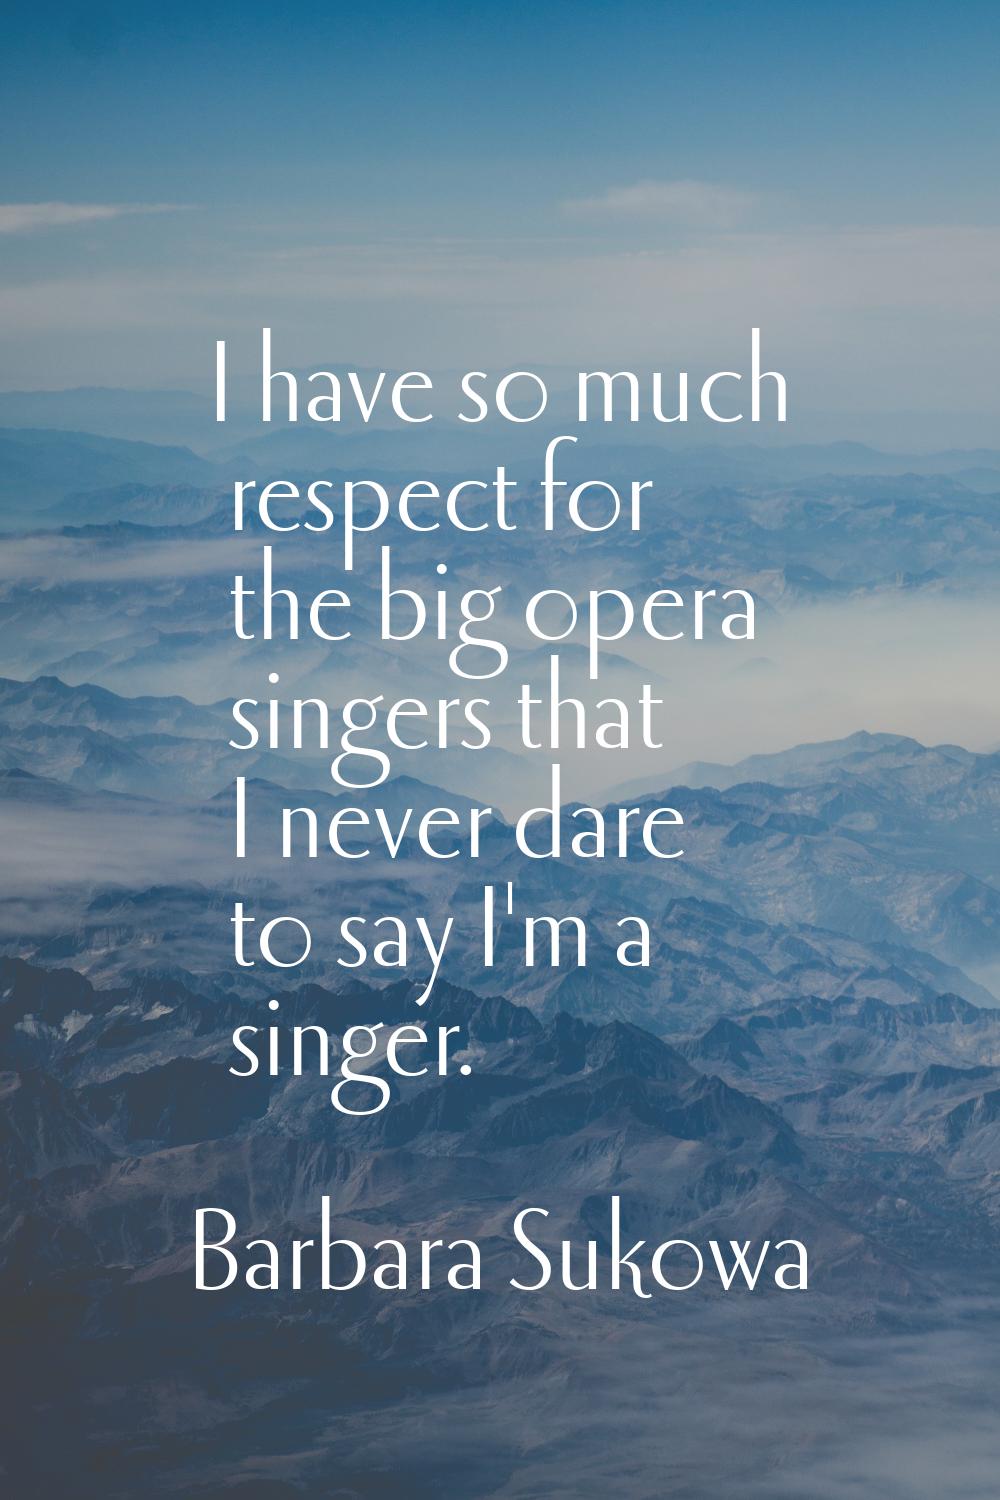 I have so much respect for the big opera singers that I never dare to say I'm a singer.